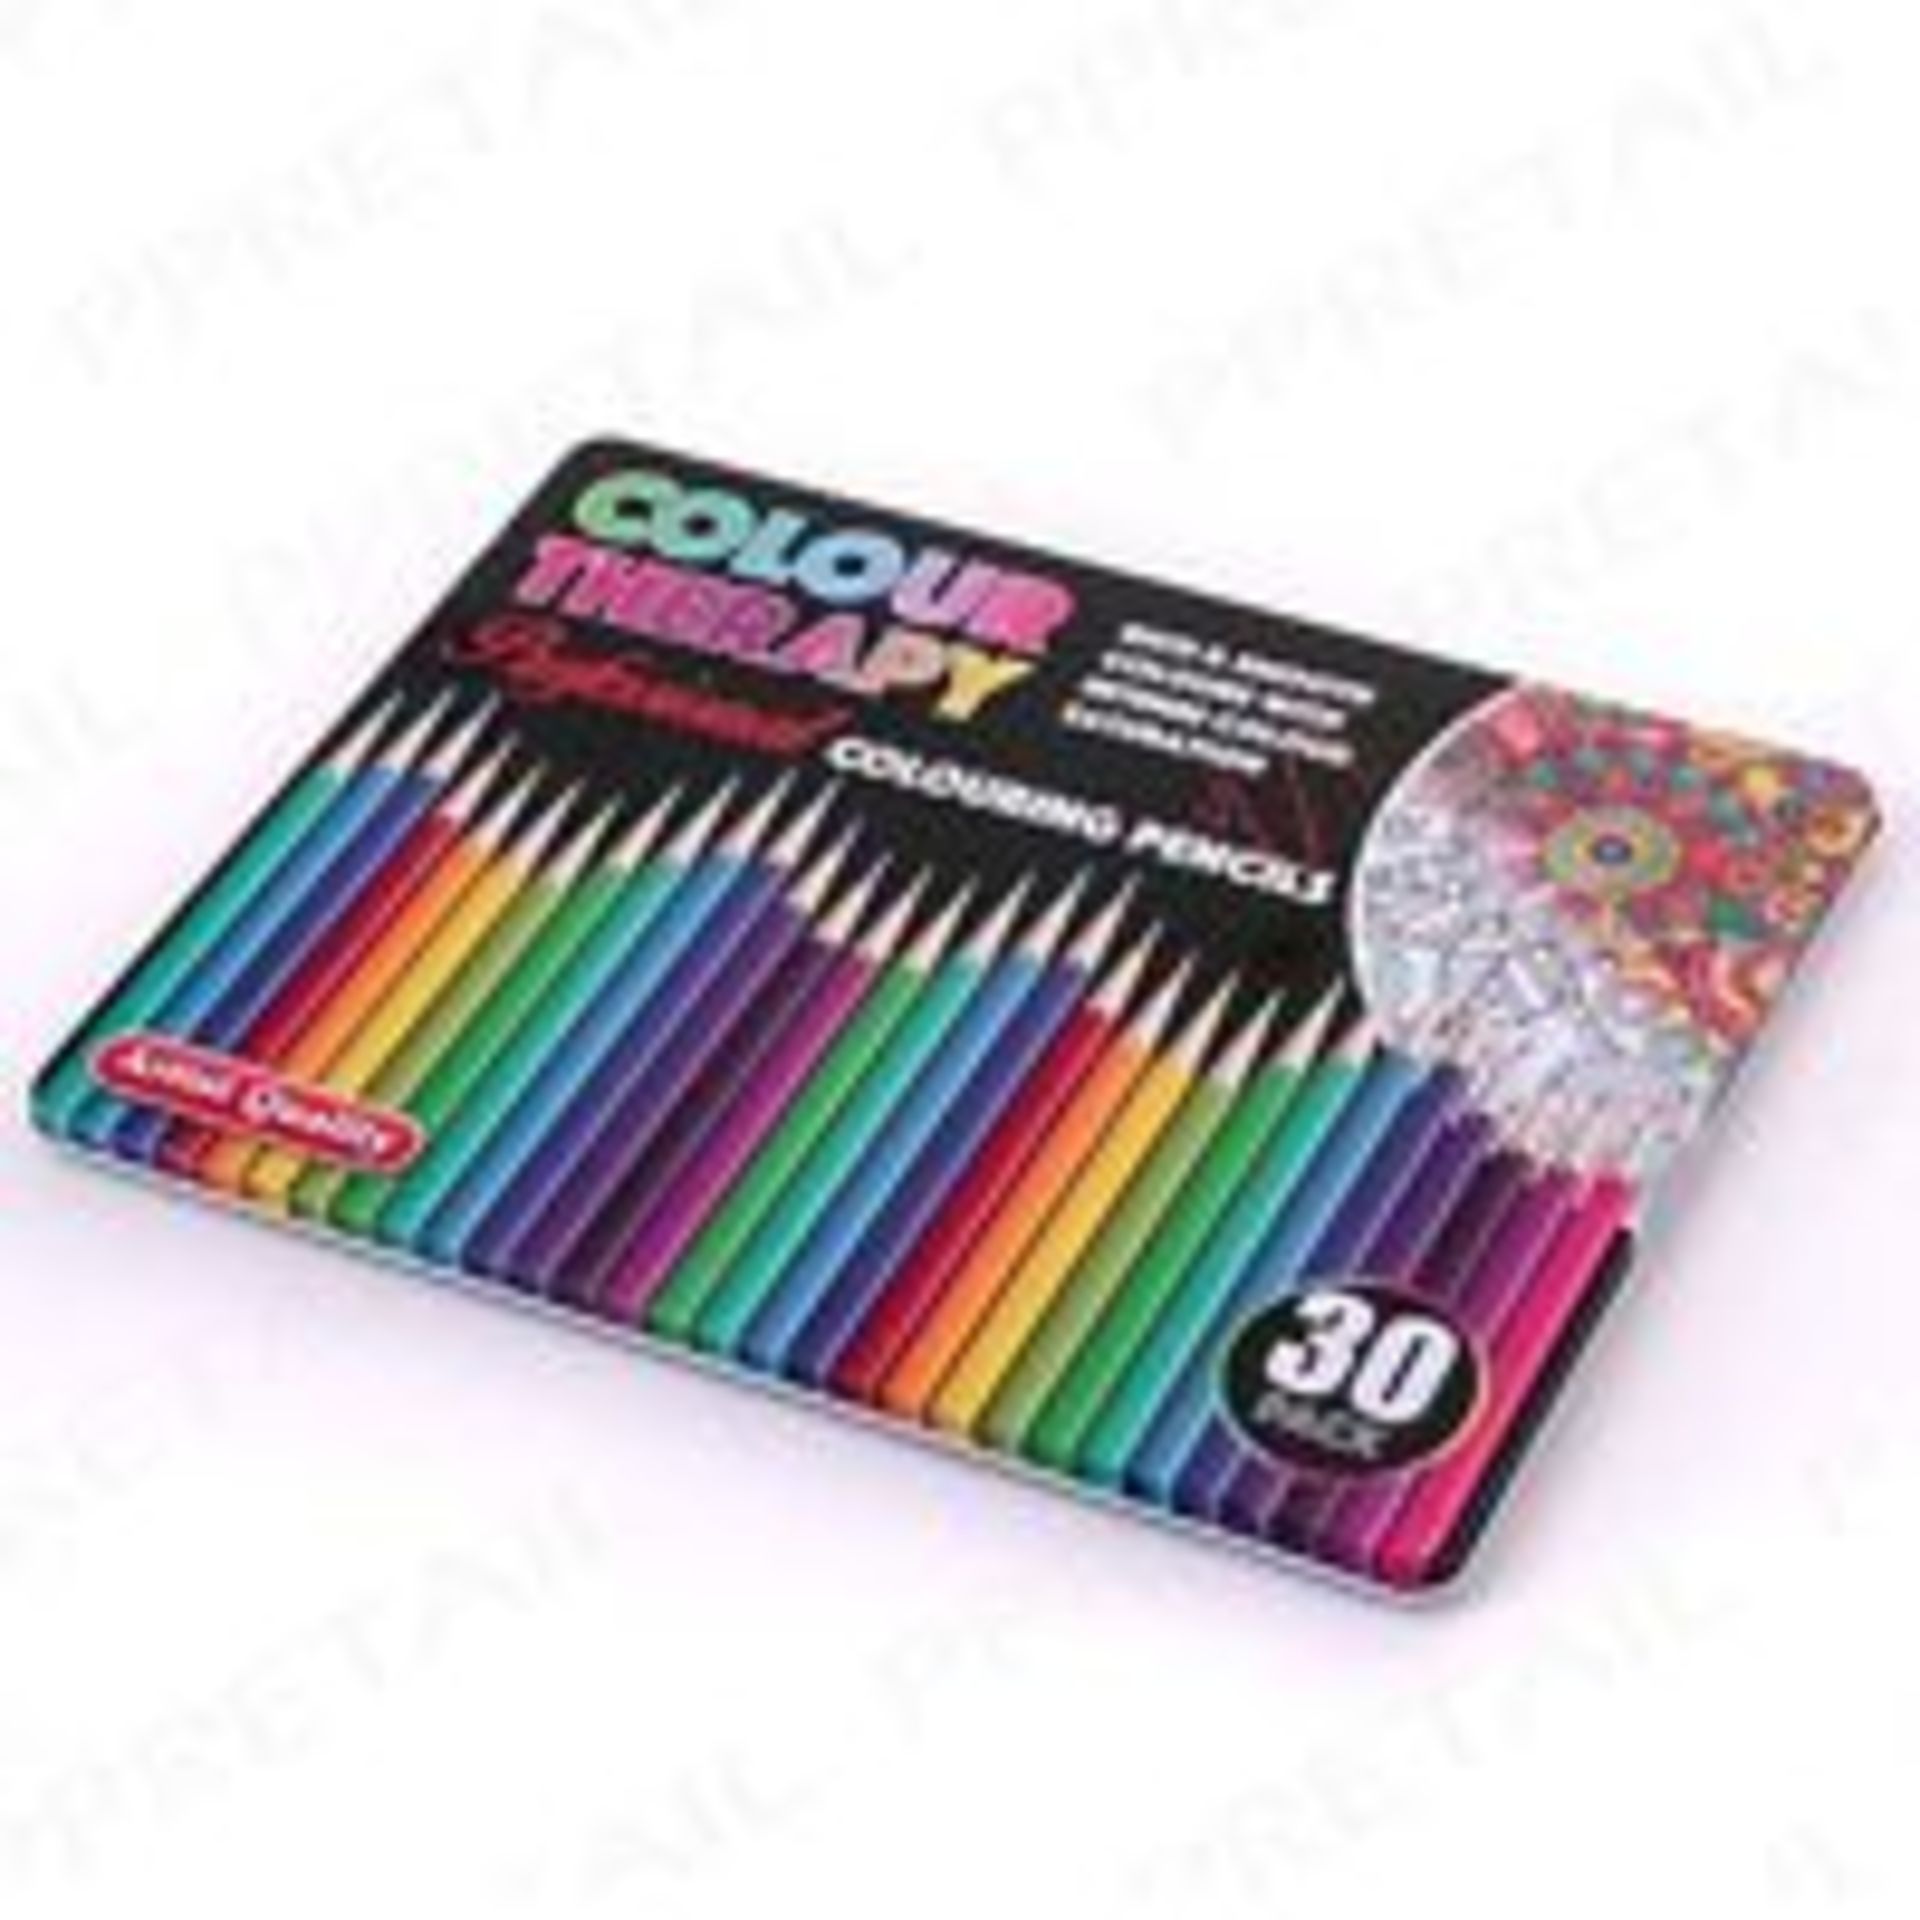 V *TRADE QTY* Brand New 30 Pack Professional Colouring Pencils - Artist Quality X 10 YOUR BID